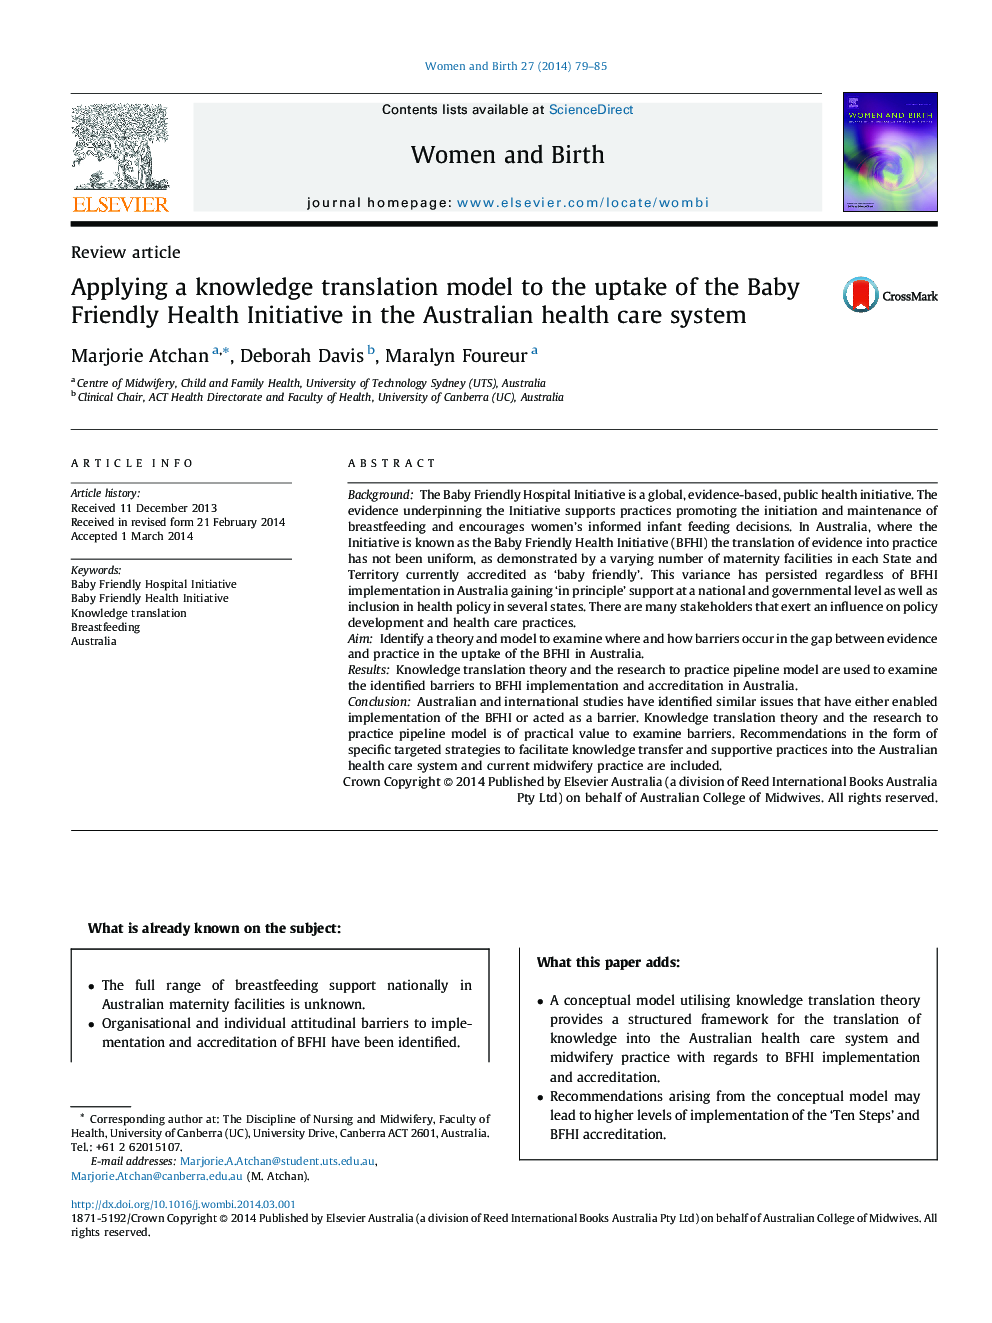 Applying a knowledge translation model to the uptake of the Baby Friendly Health Initiative in the Australian health care system